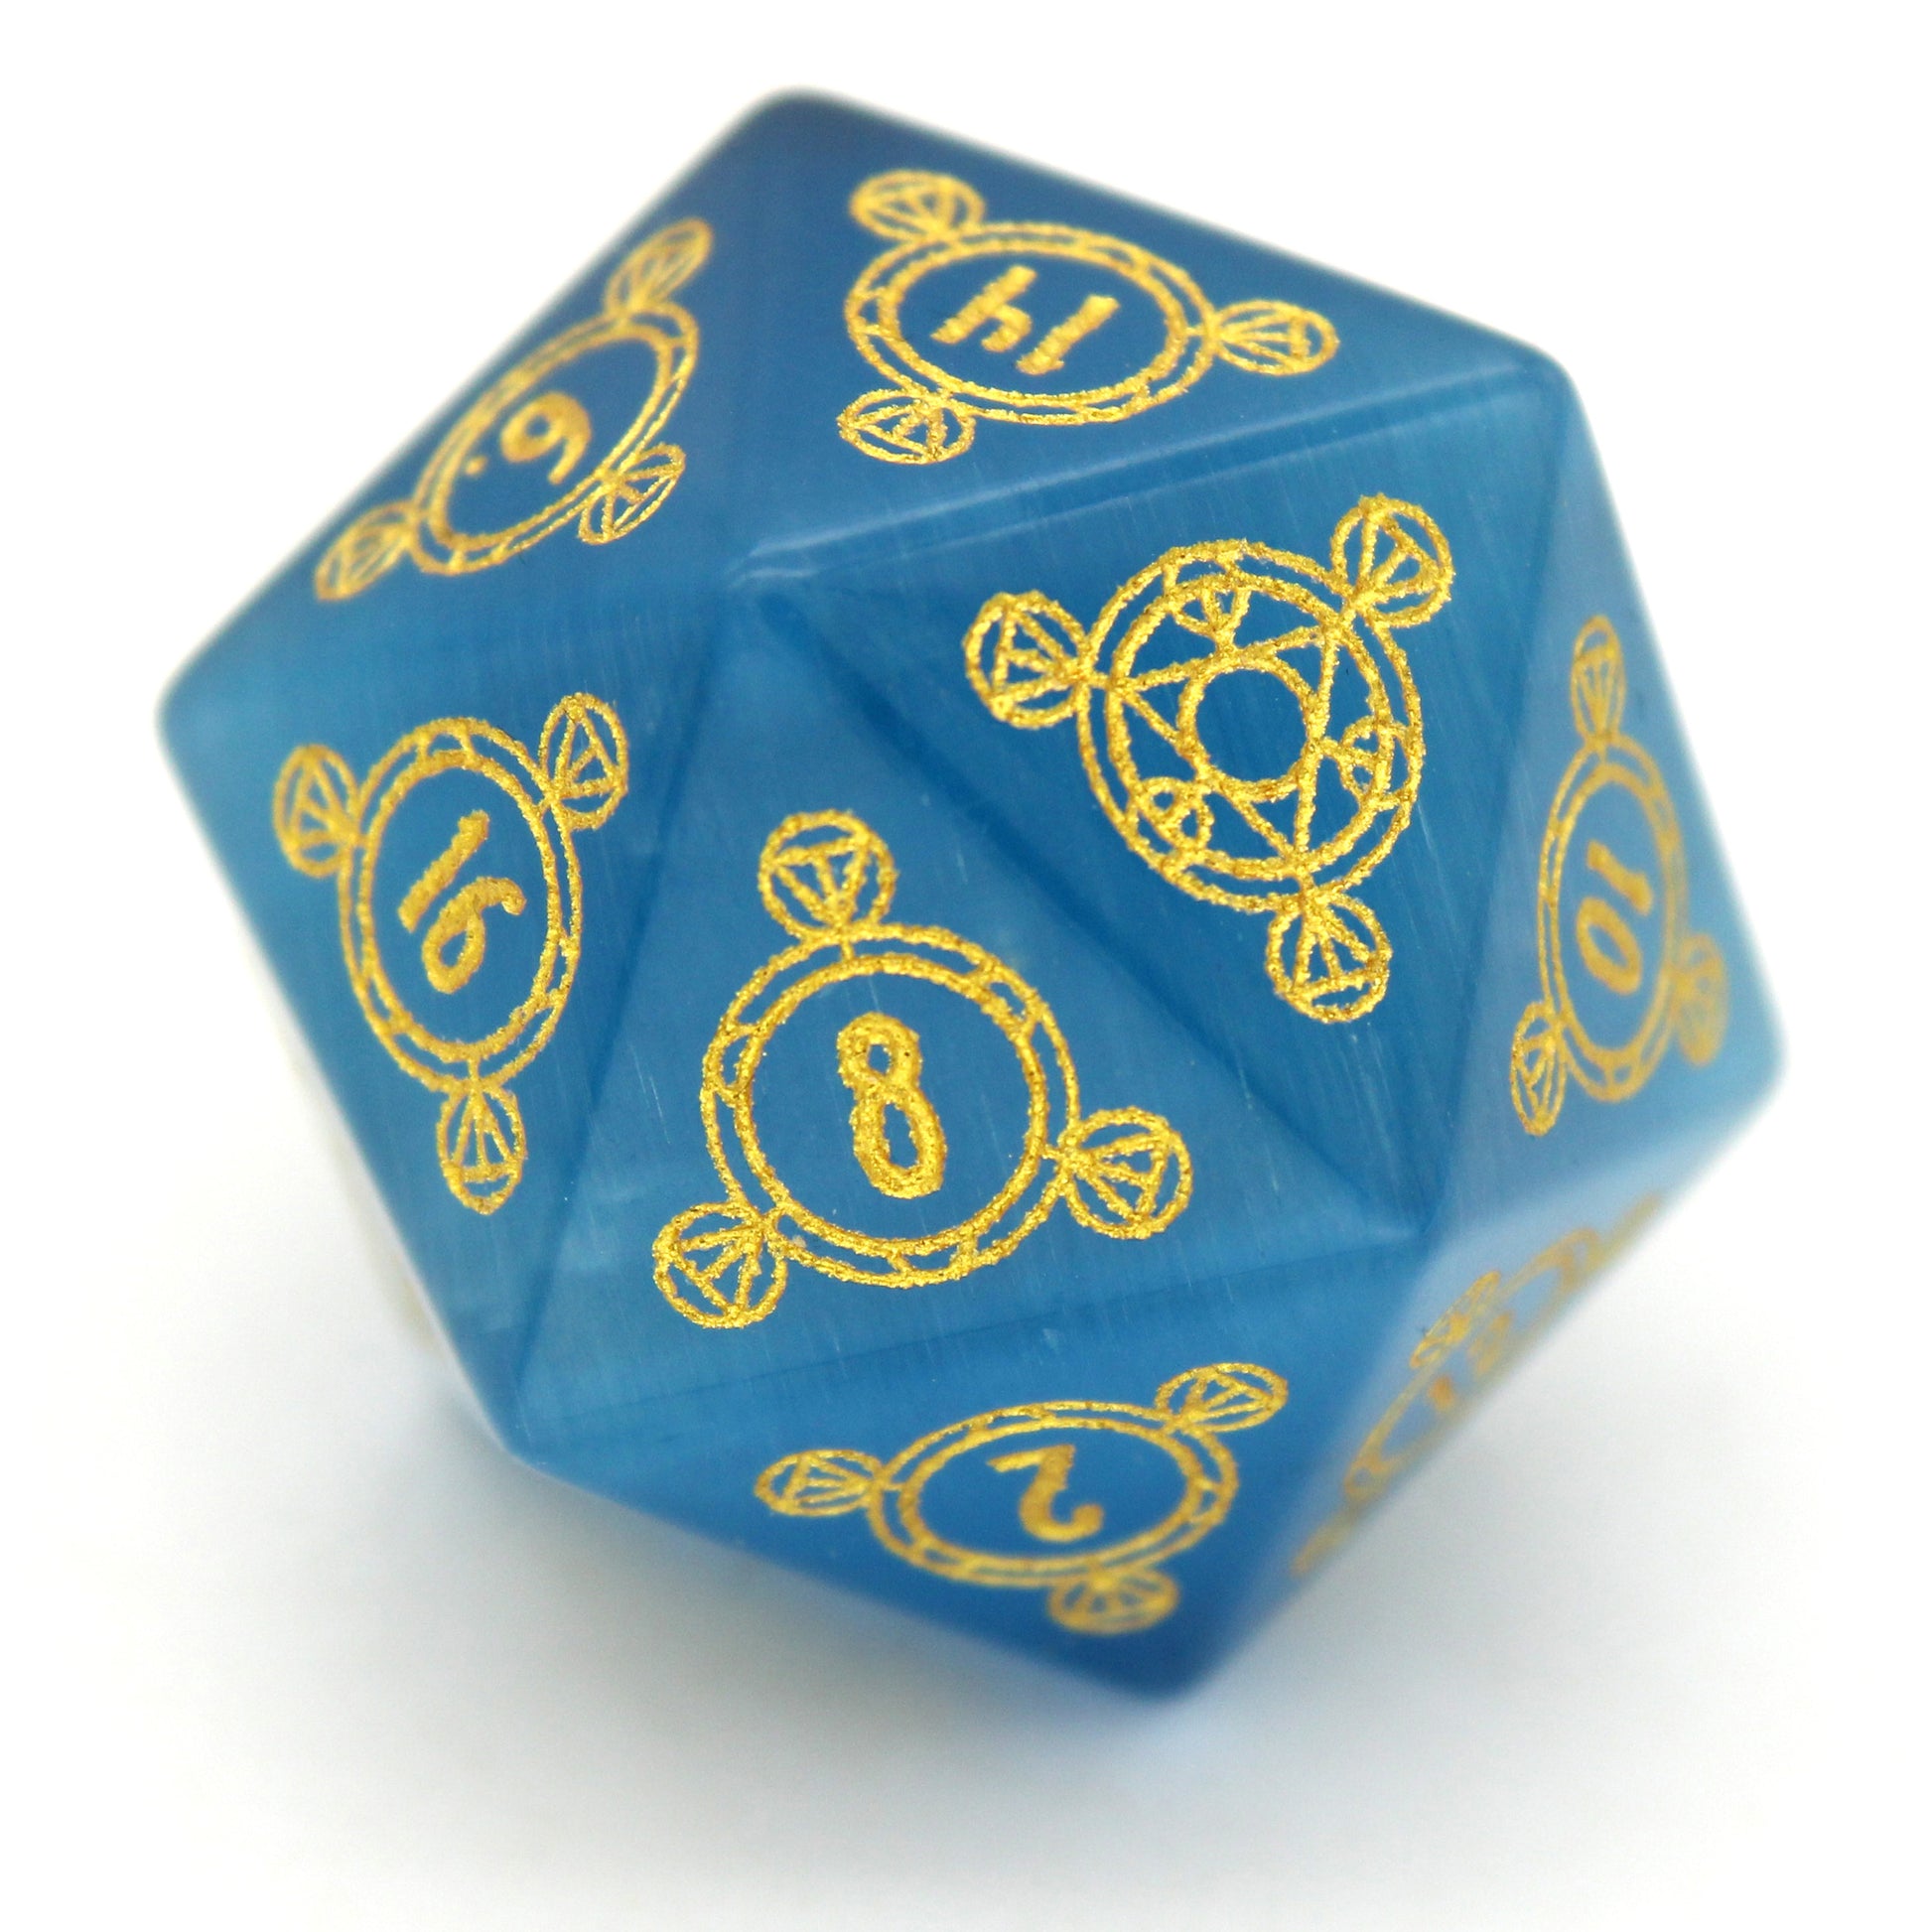 Midsummer's Eve is a 7-piece set of dice cut from blue, lab-made chatoyant stone, engraved with Dice Envy's exclusive Sigil design and inked in gold.